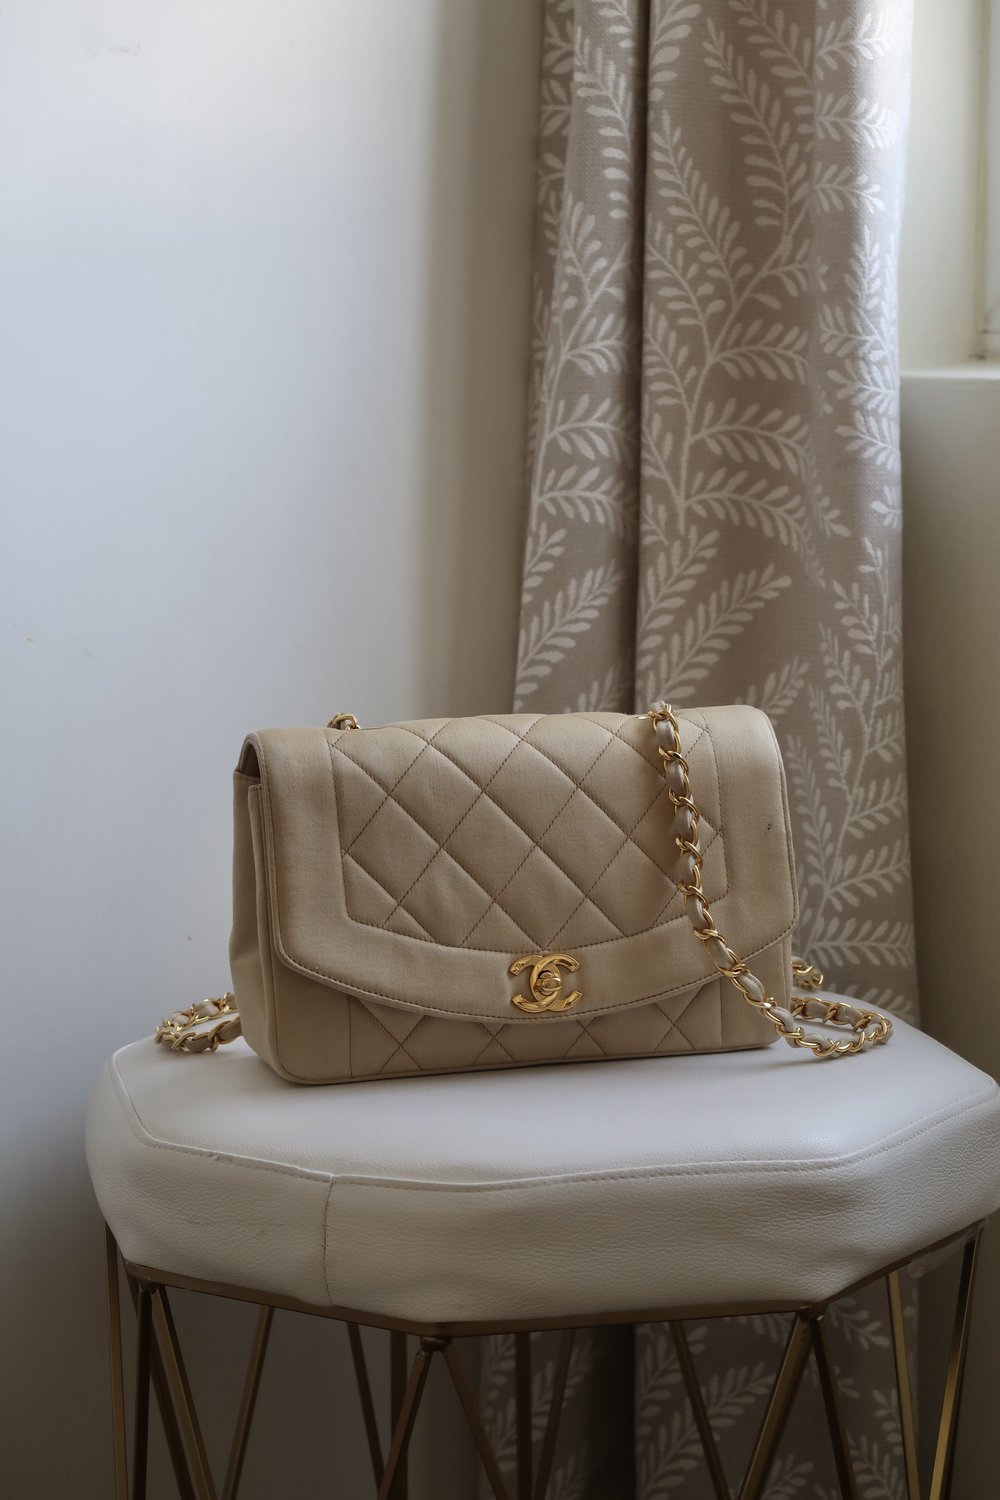 Vintage Chanel Beige Fabric Quilted Diana Flap Bag - 2 series (1991 - 1994)  — Blaise Ruby Loves